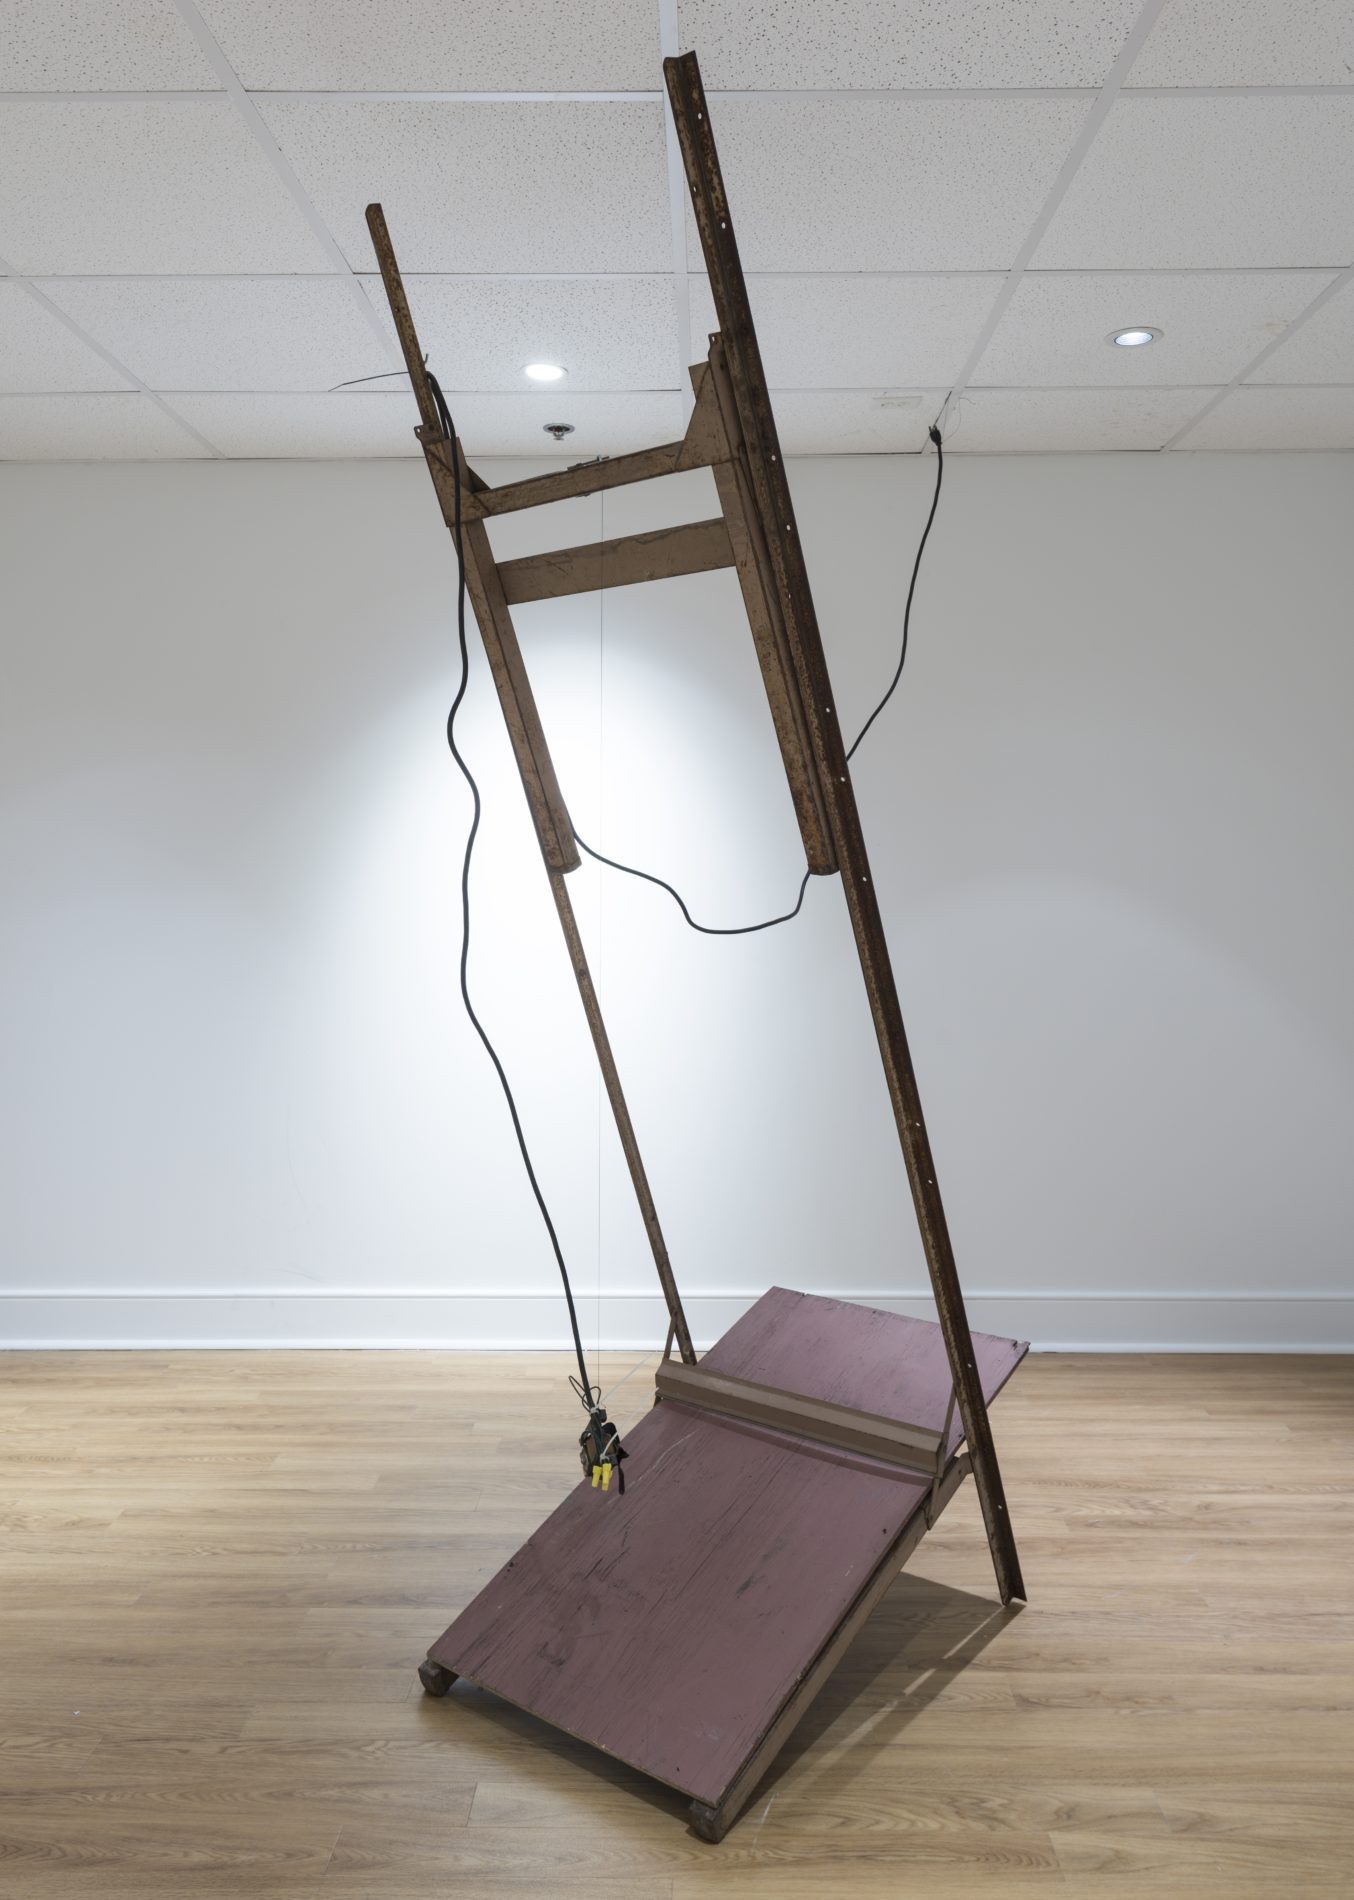 A mostly-wooden sculpture by Virginia Overton leans towards the camera with a black electrical cord hanging off the top of the sculpture. The piece stands in the corner of a gallery with white floors and ceiling and light-colored wood flooring.